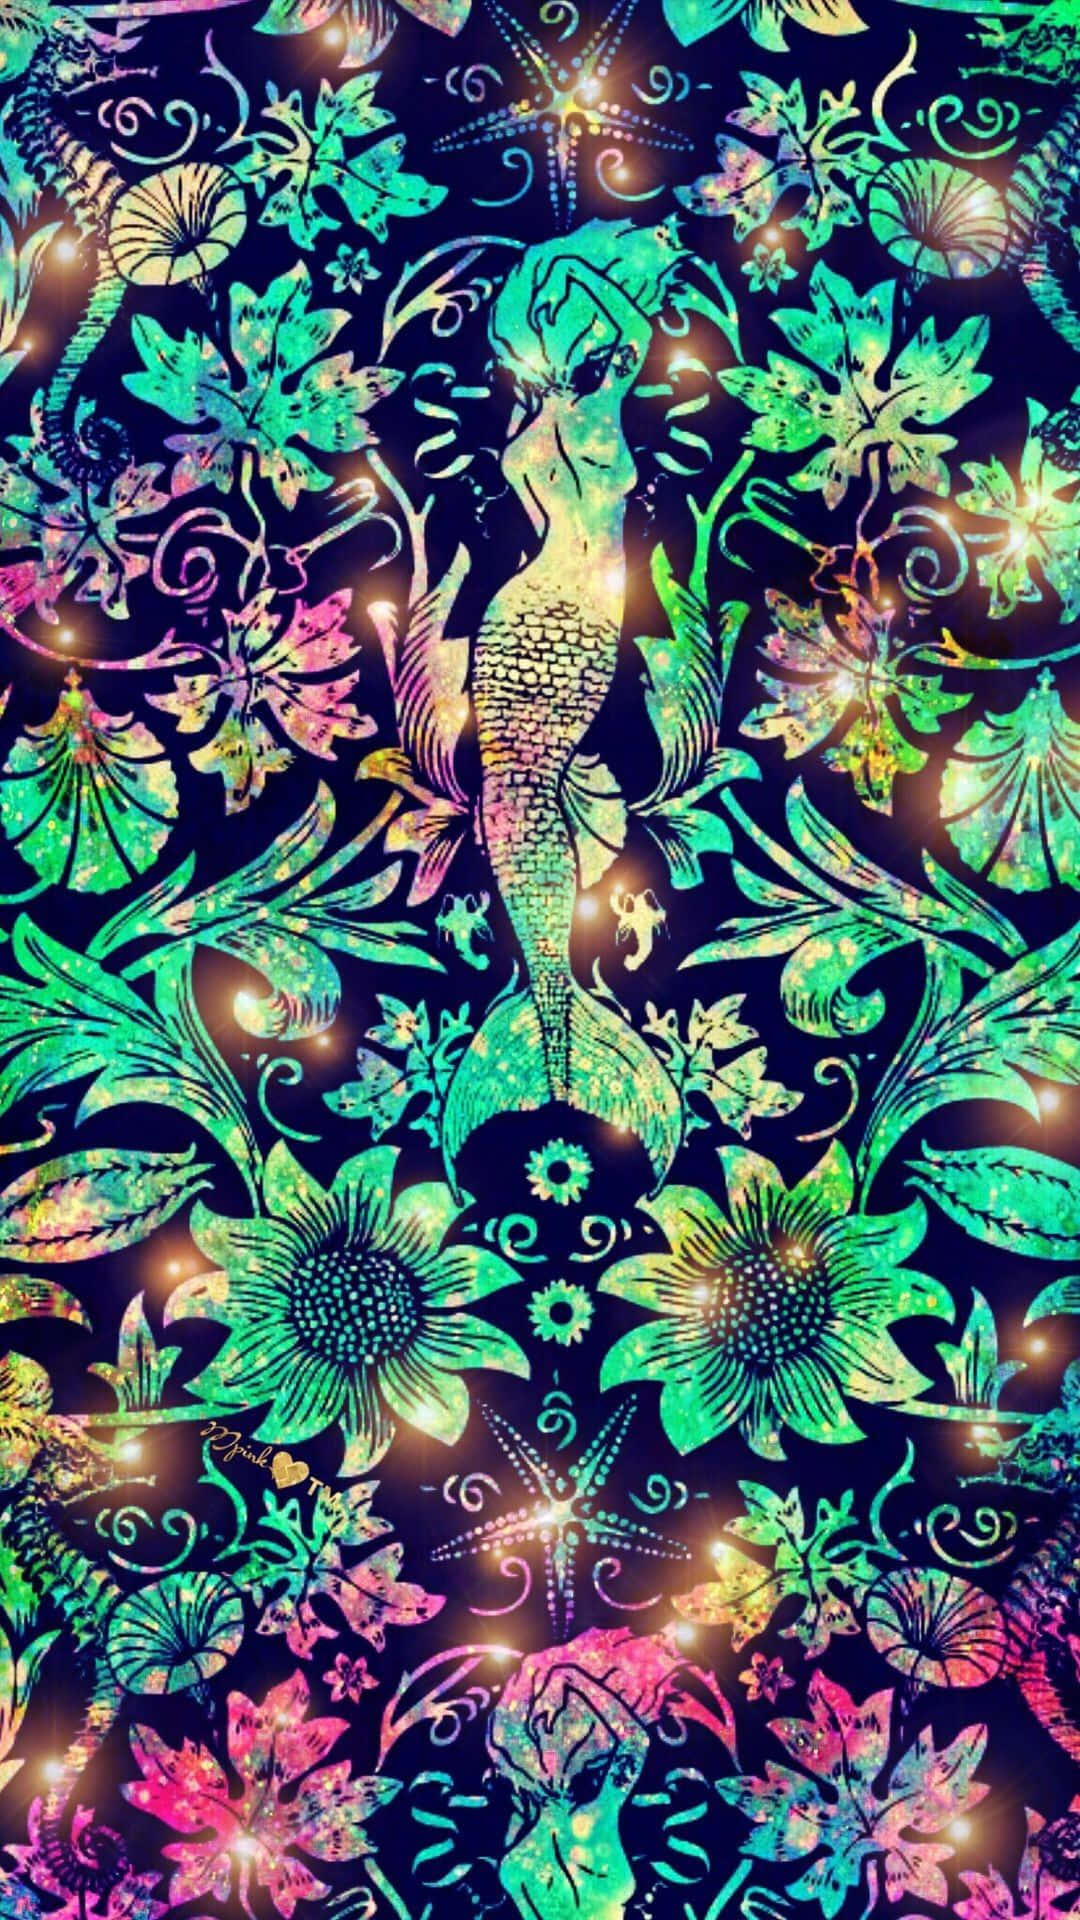 Mermaid Glitter Surrounded By Flowers Wallpaper